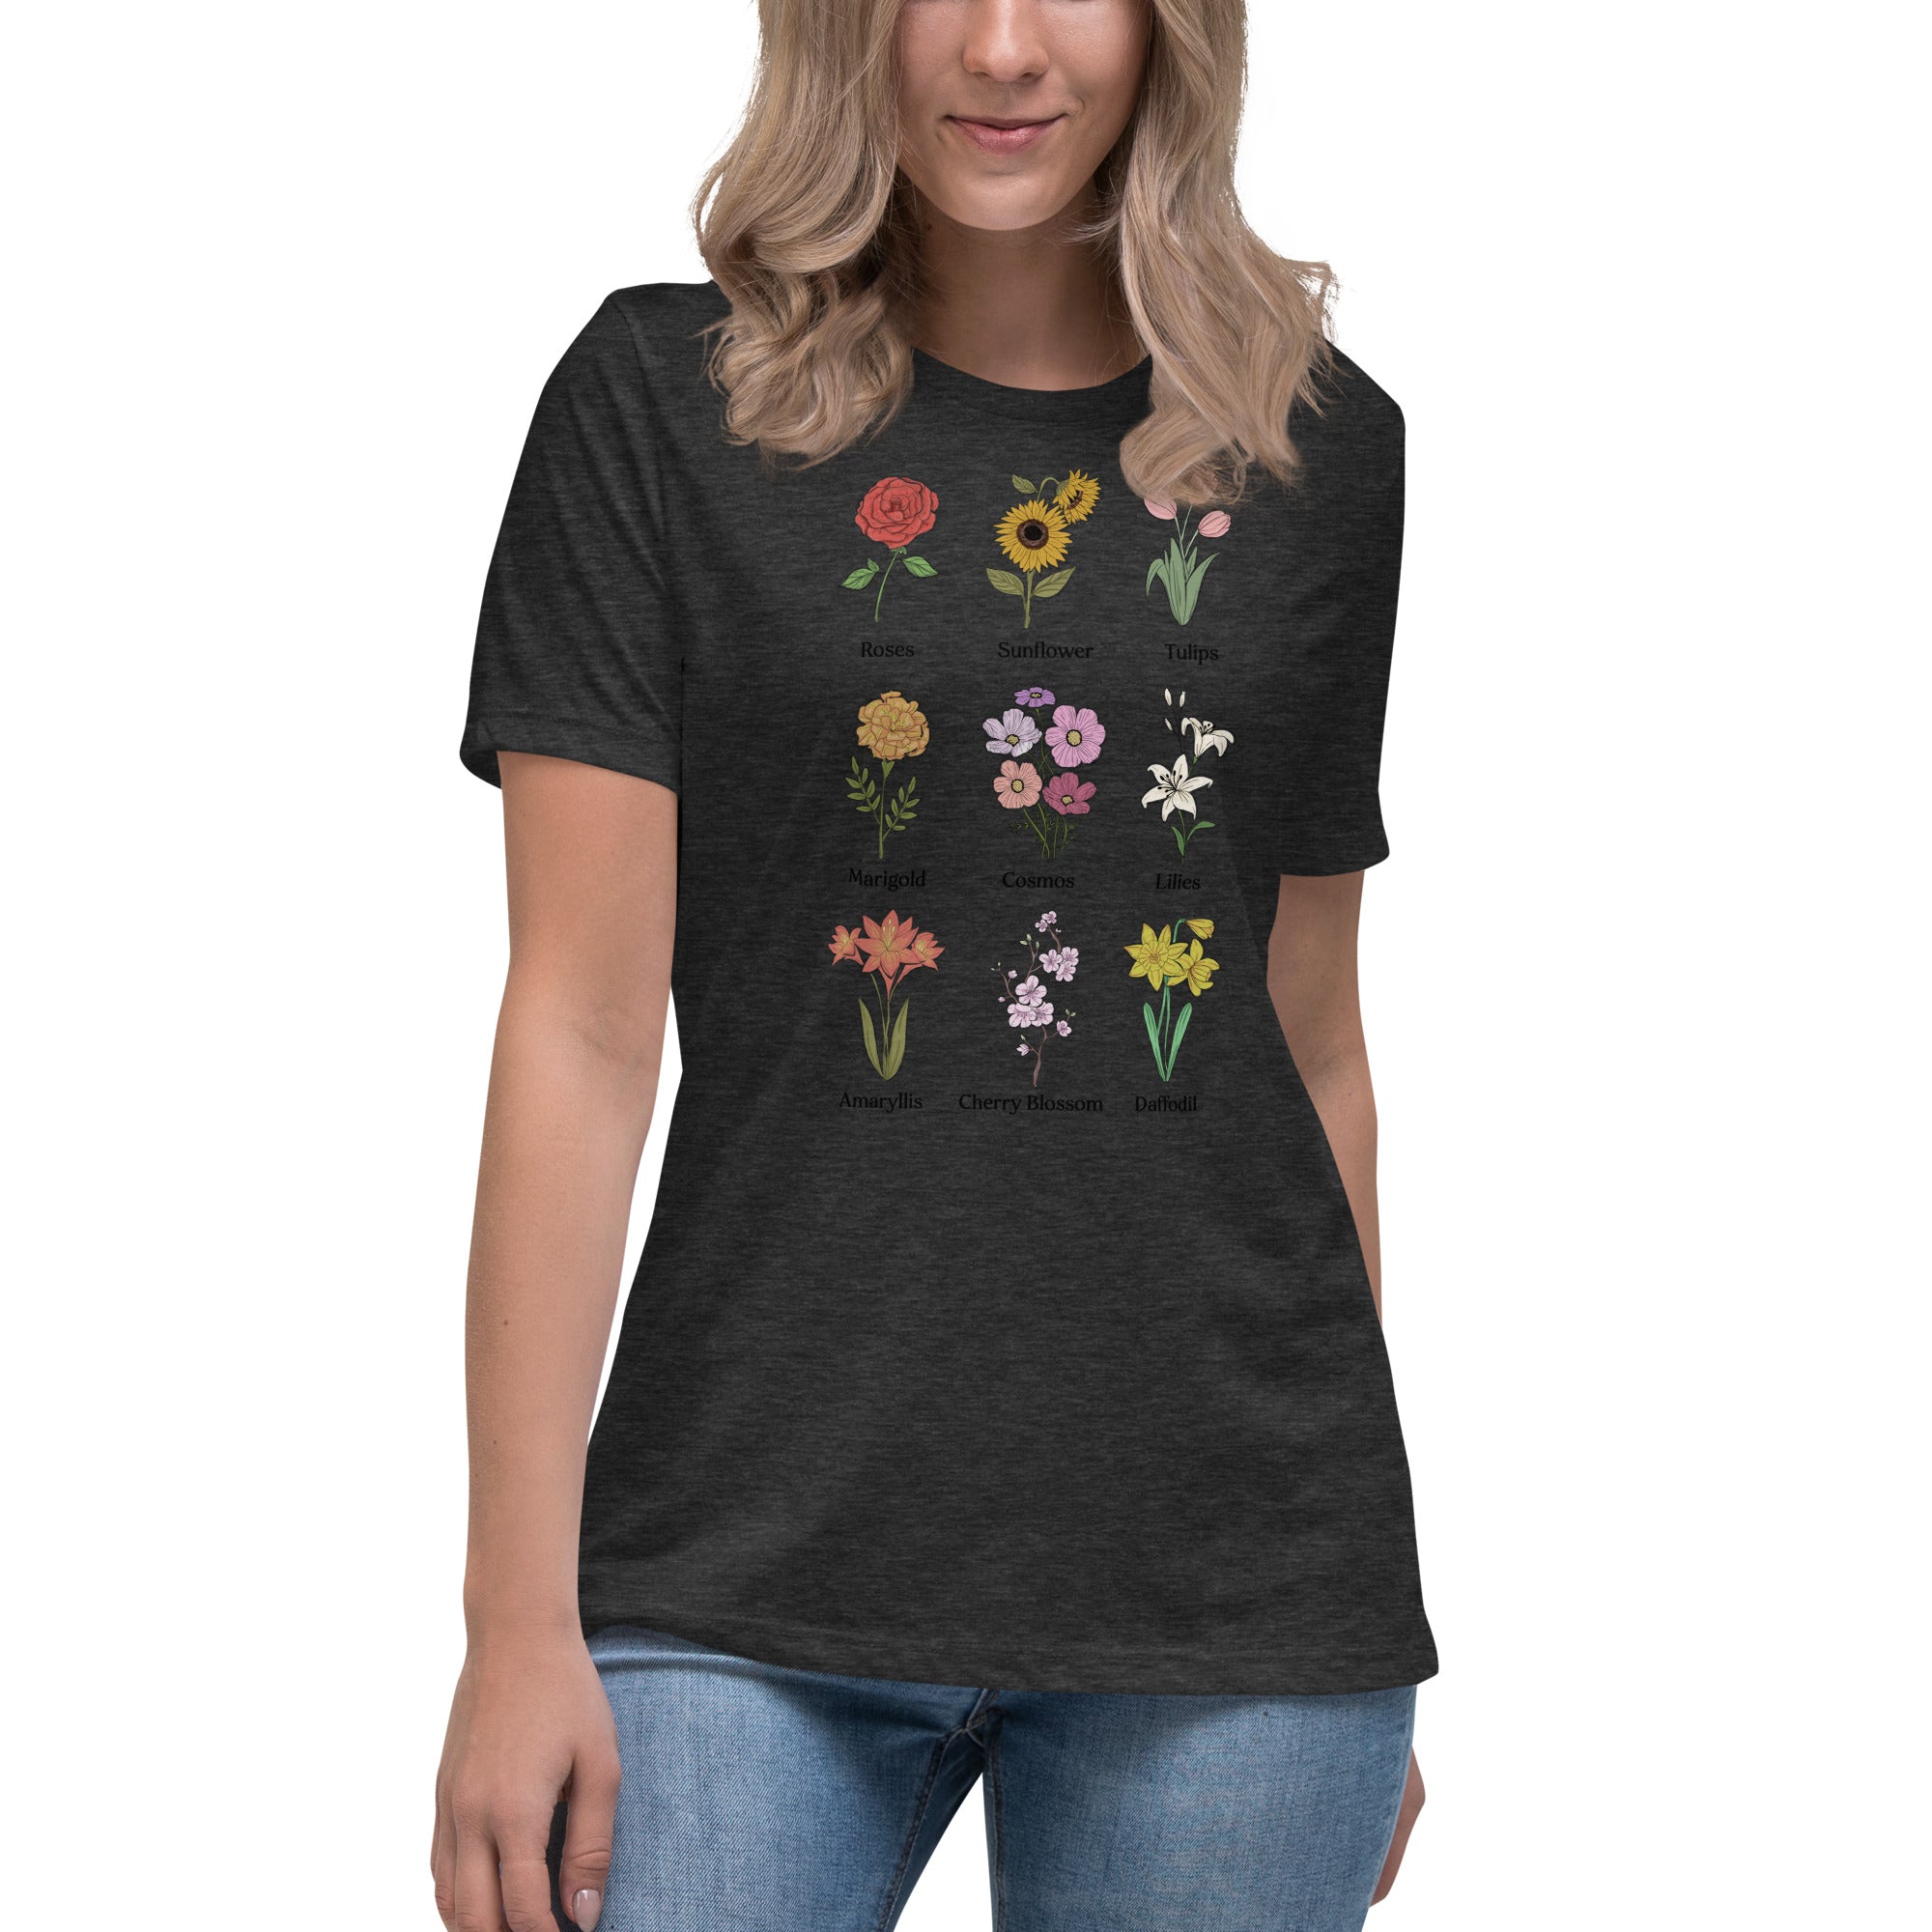 Kind Of Flowers - Women's Relaxed T-Shirt